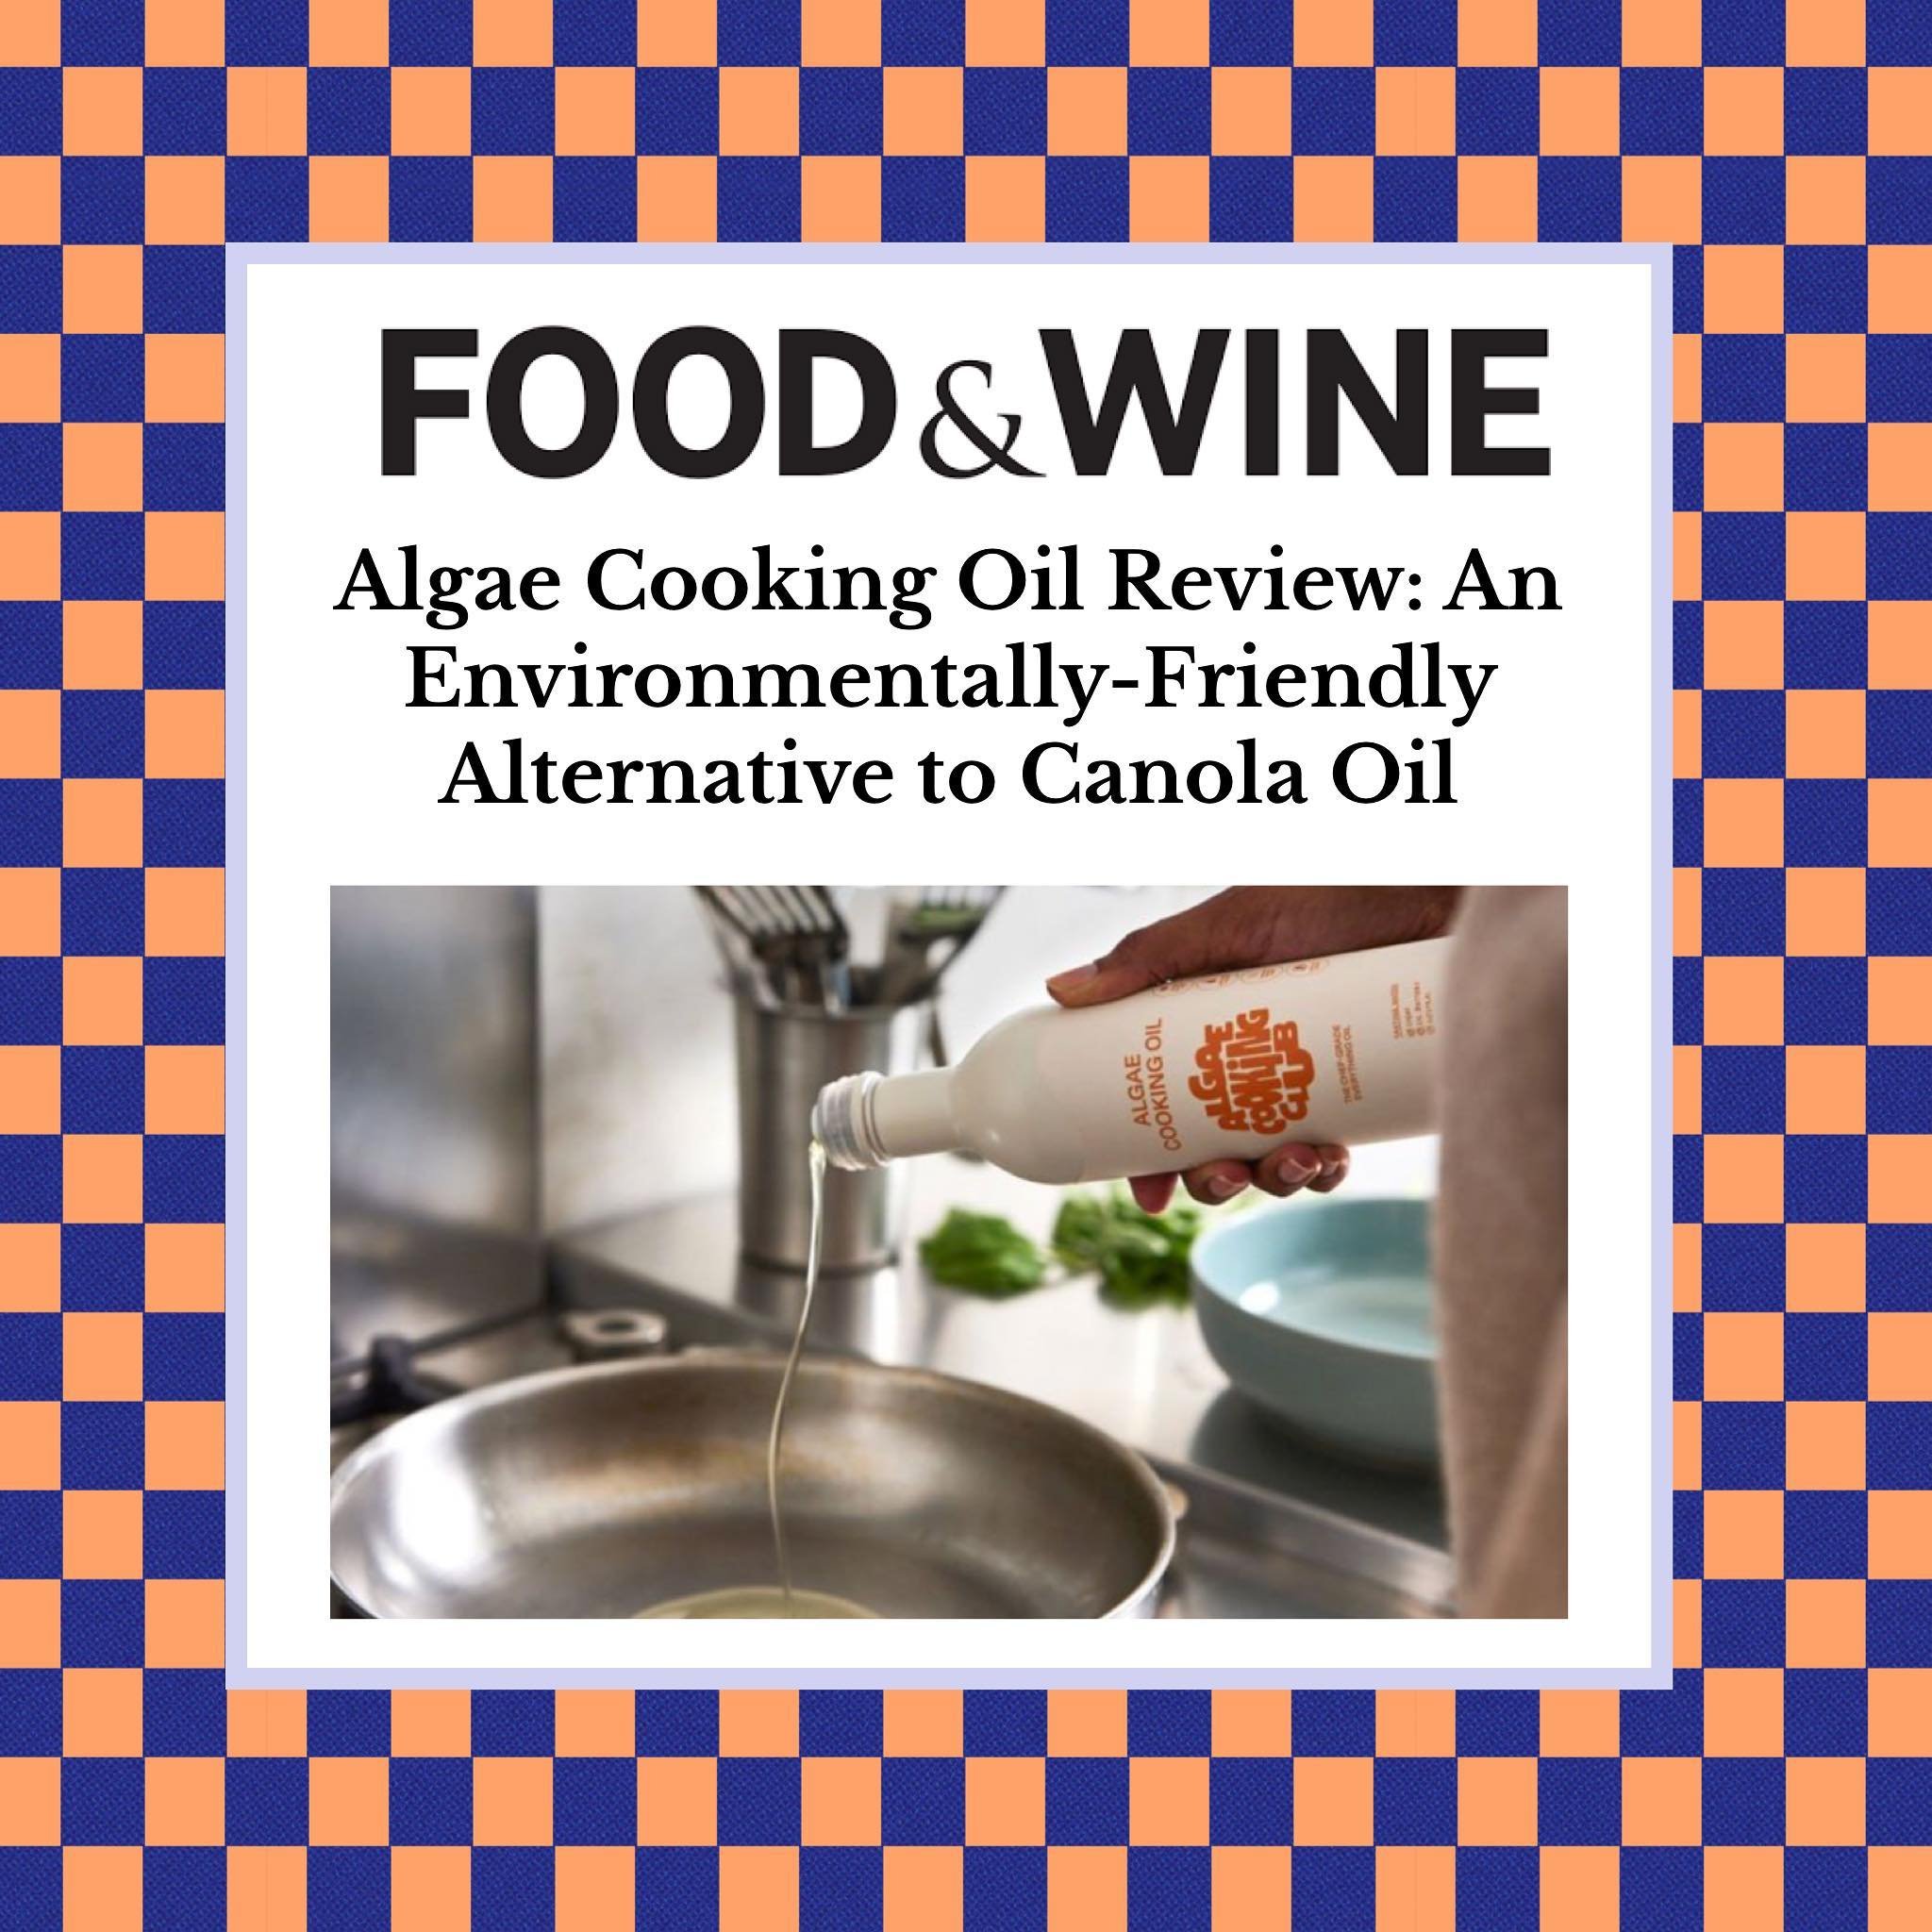 A glowing review of Algae Cooking Club in @foodandwine from @burtsherman 

Client of Krupa Consulting